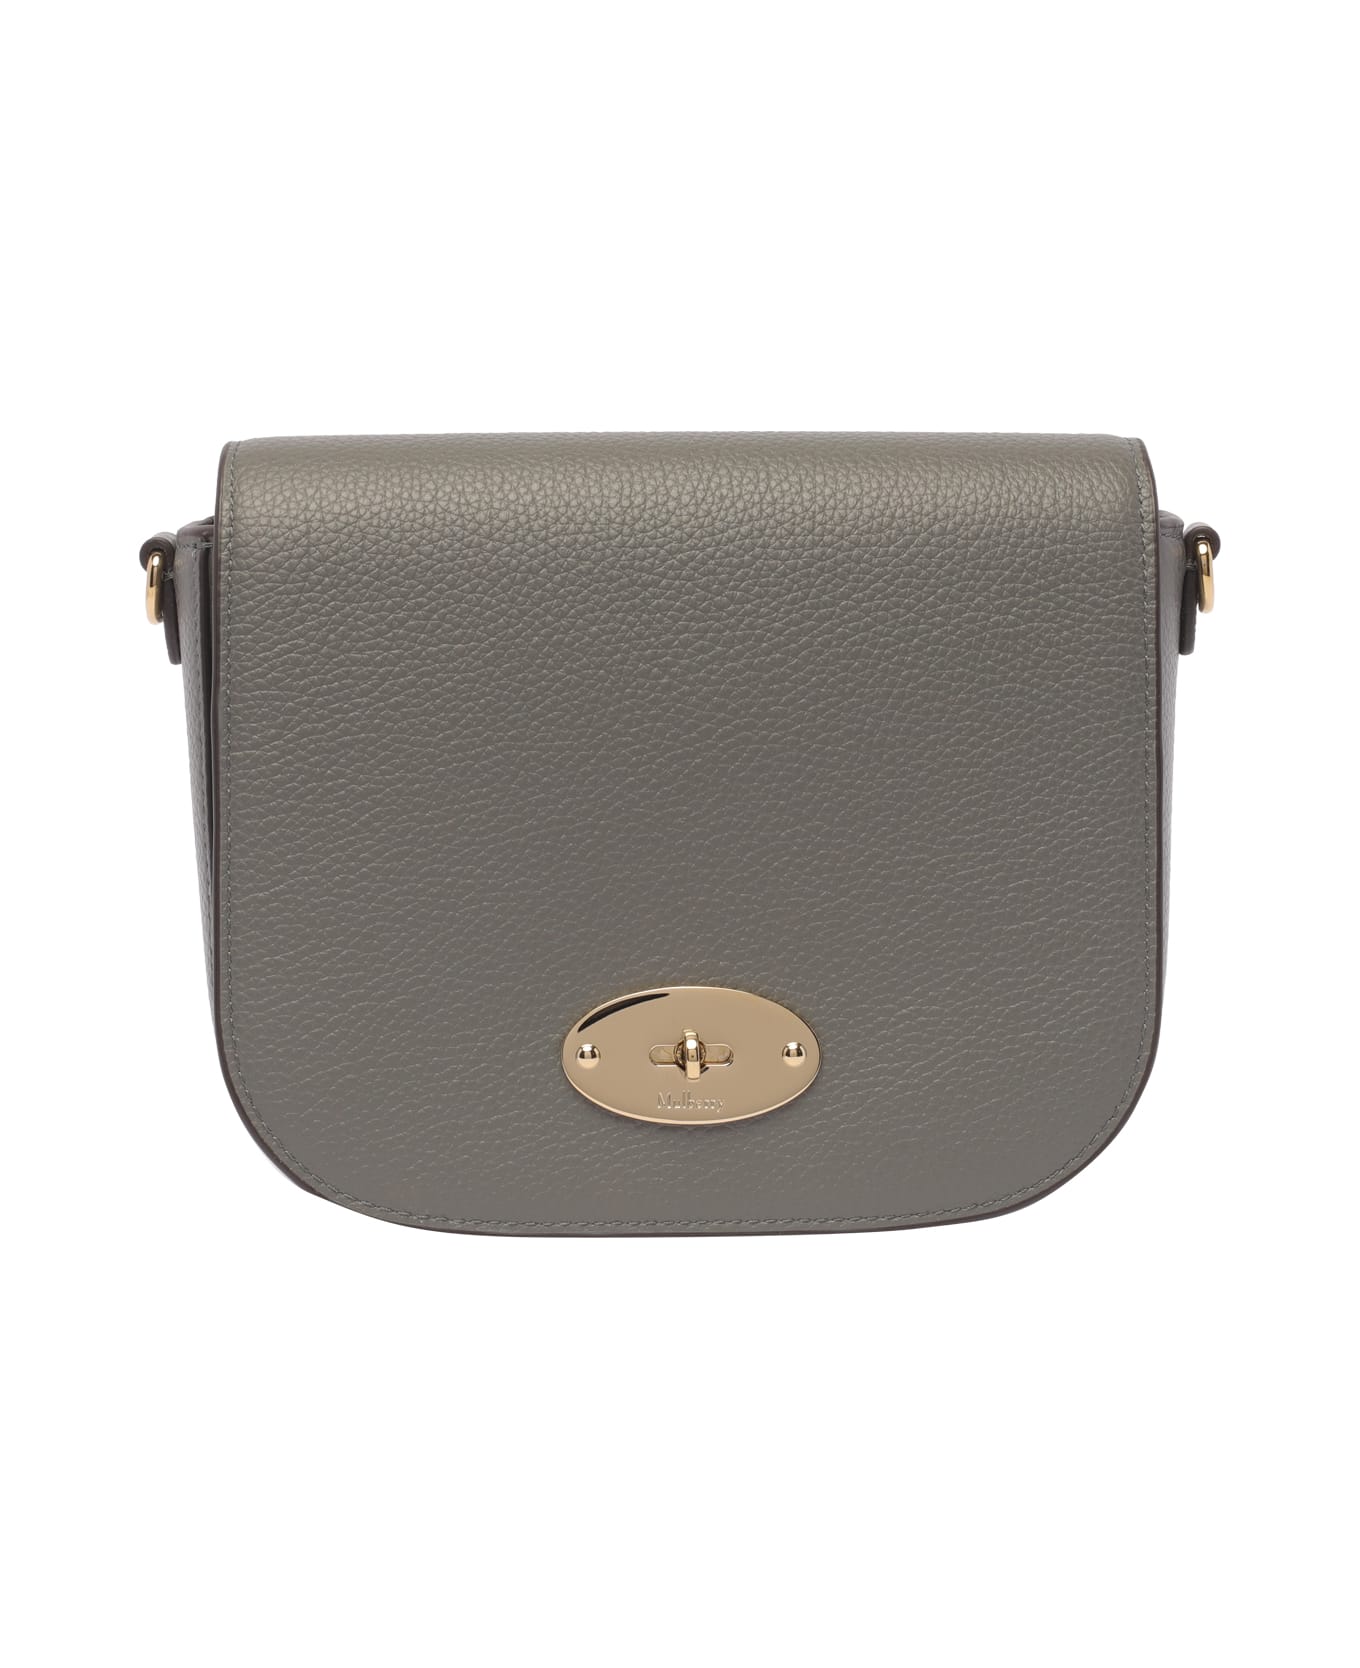 Mulberry Small Darley Satchel Classic Bag - Grey